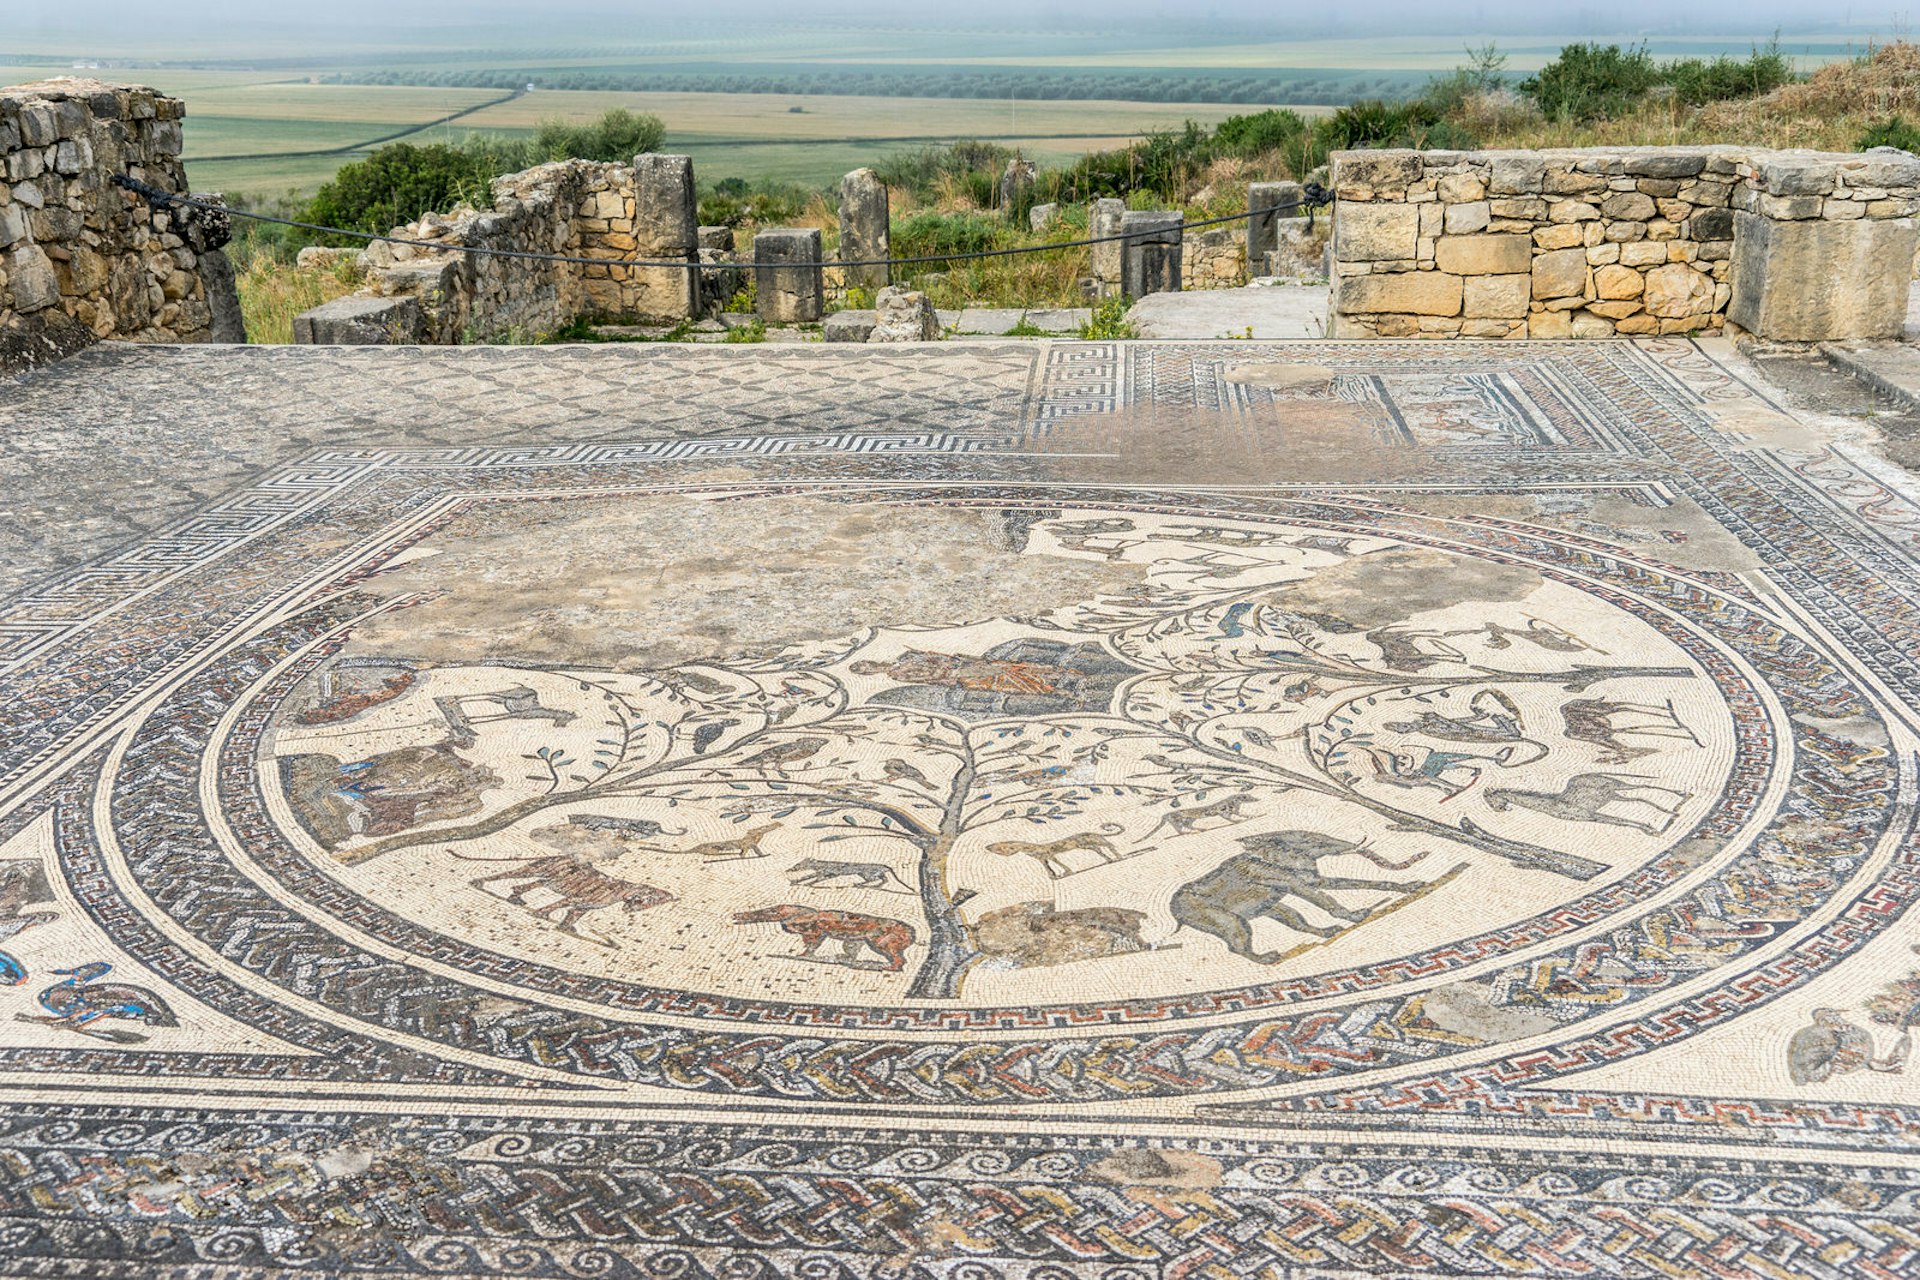 Mosaic floor, Volubilis ruins, the excavations of the roman city in the archaeological site Volubilis, North Morocco. Image by oBebee / Shutterstock